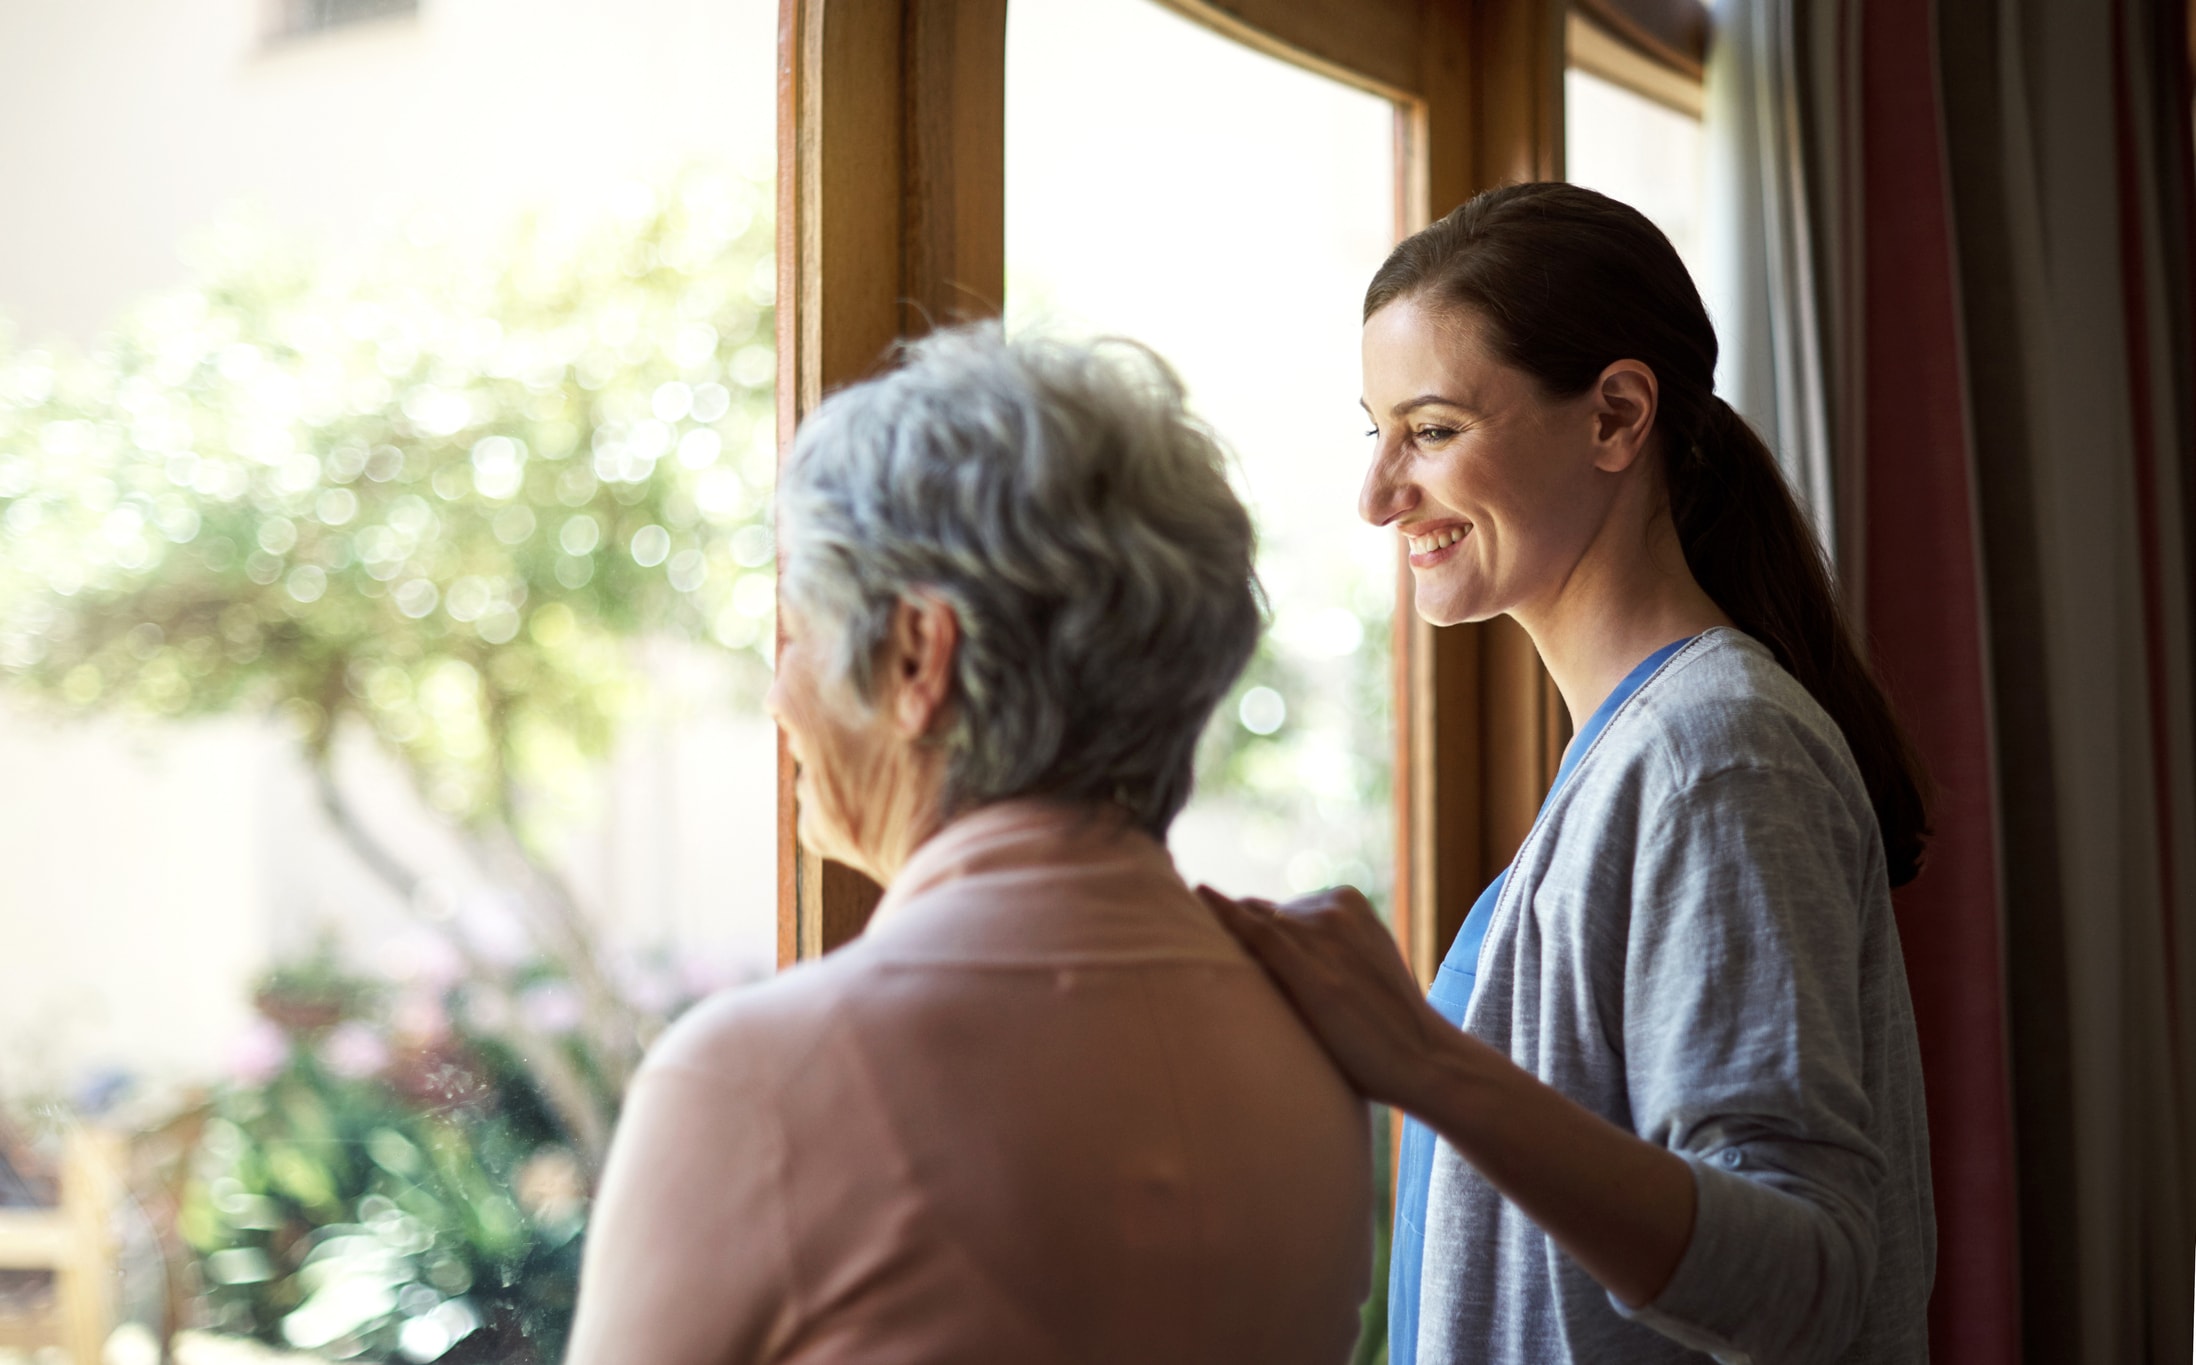 Questions to ask during an aged care provider interview